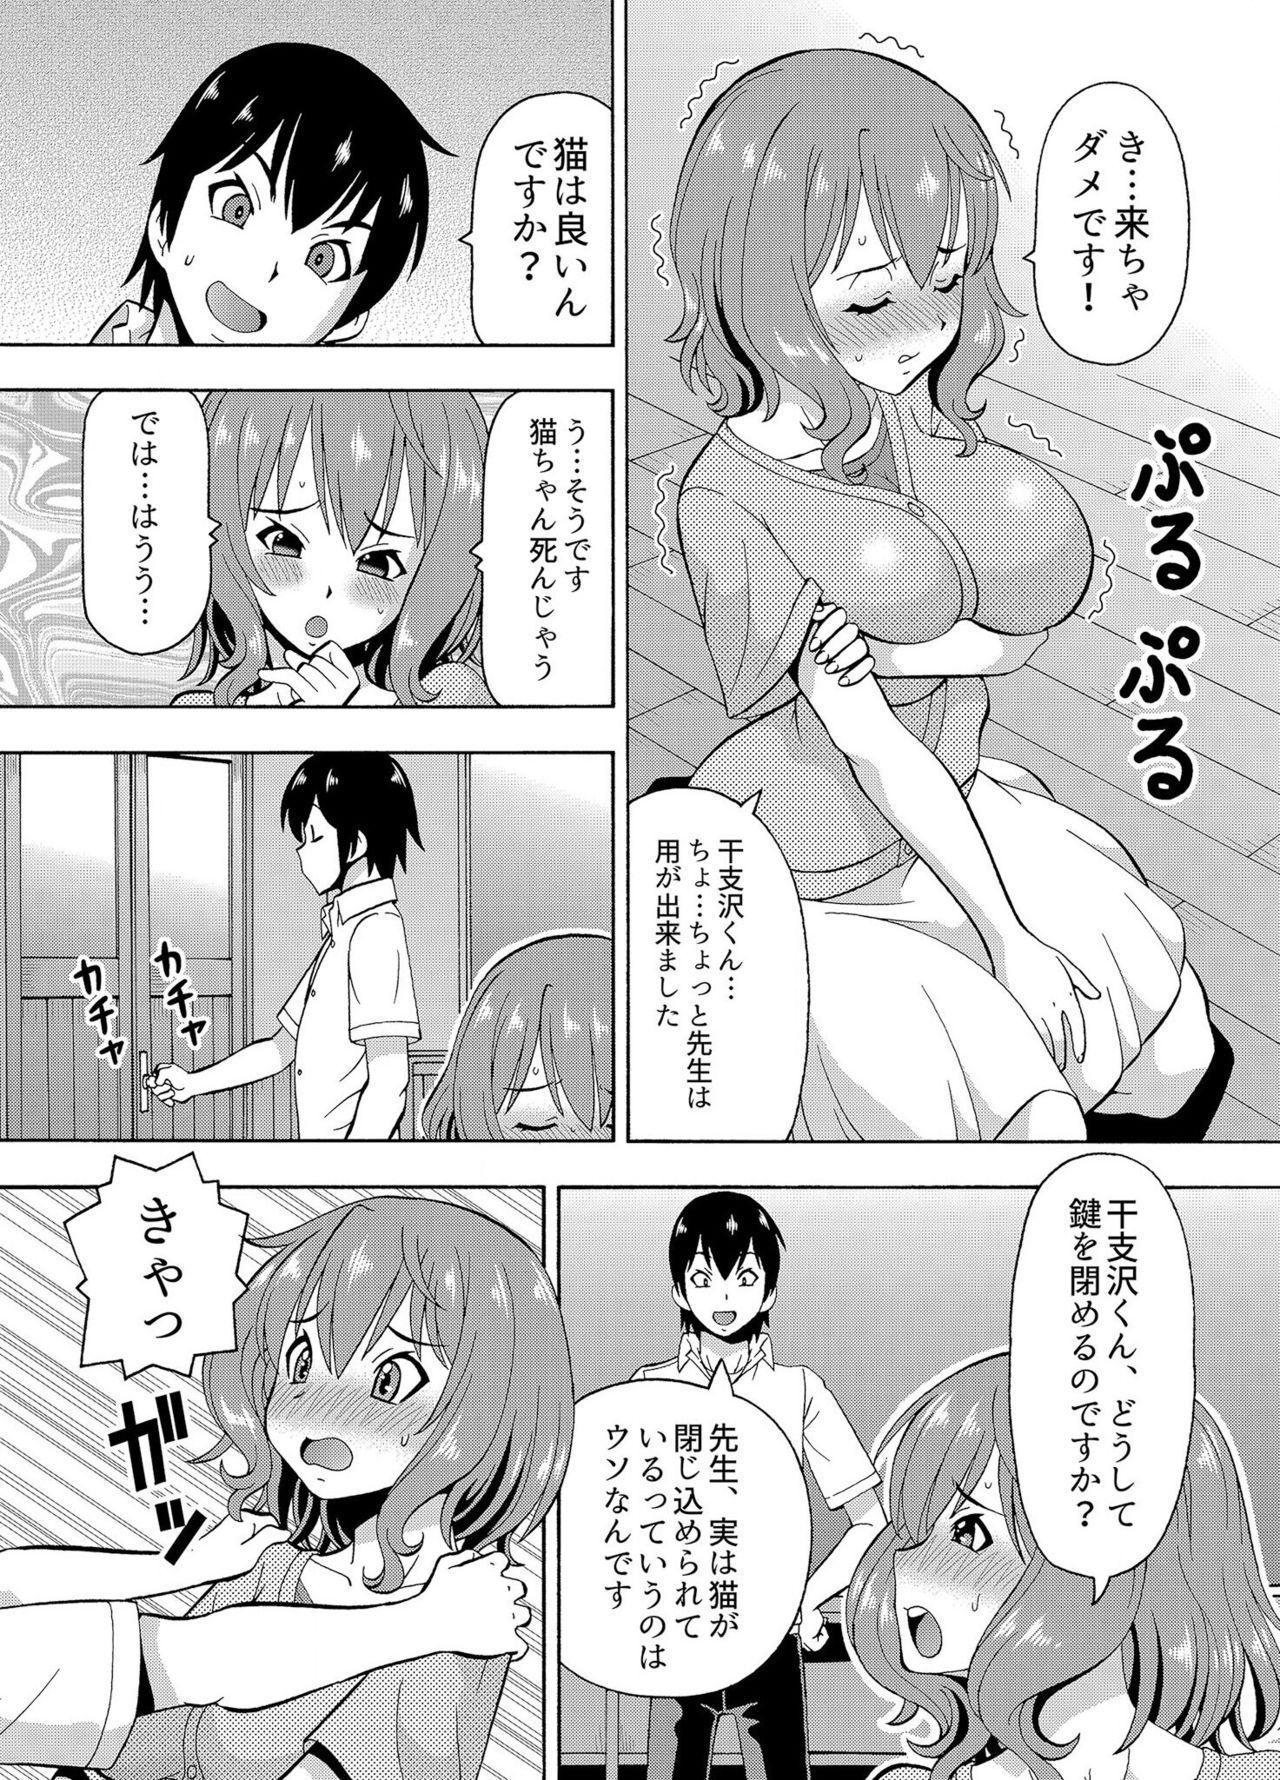 Doggy Style [薔薇色の日々] パラメータ・リモコン -あの娘のアソコを簡単操作！？-（4） Parties - Page 9